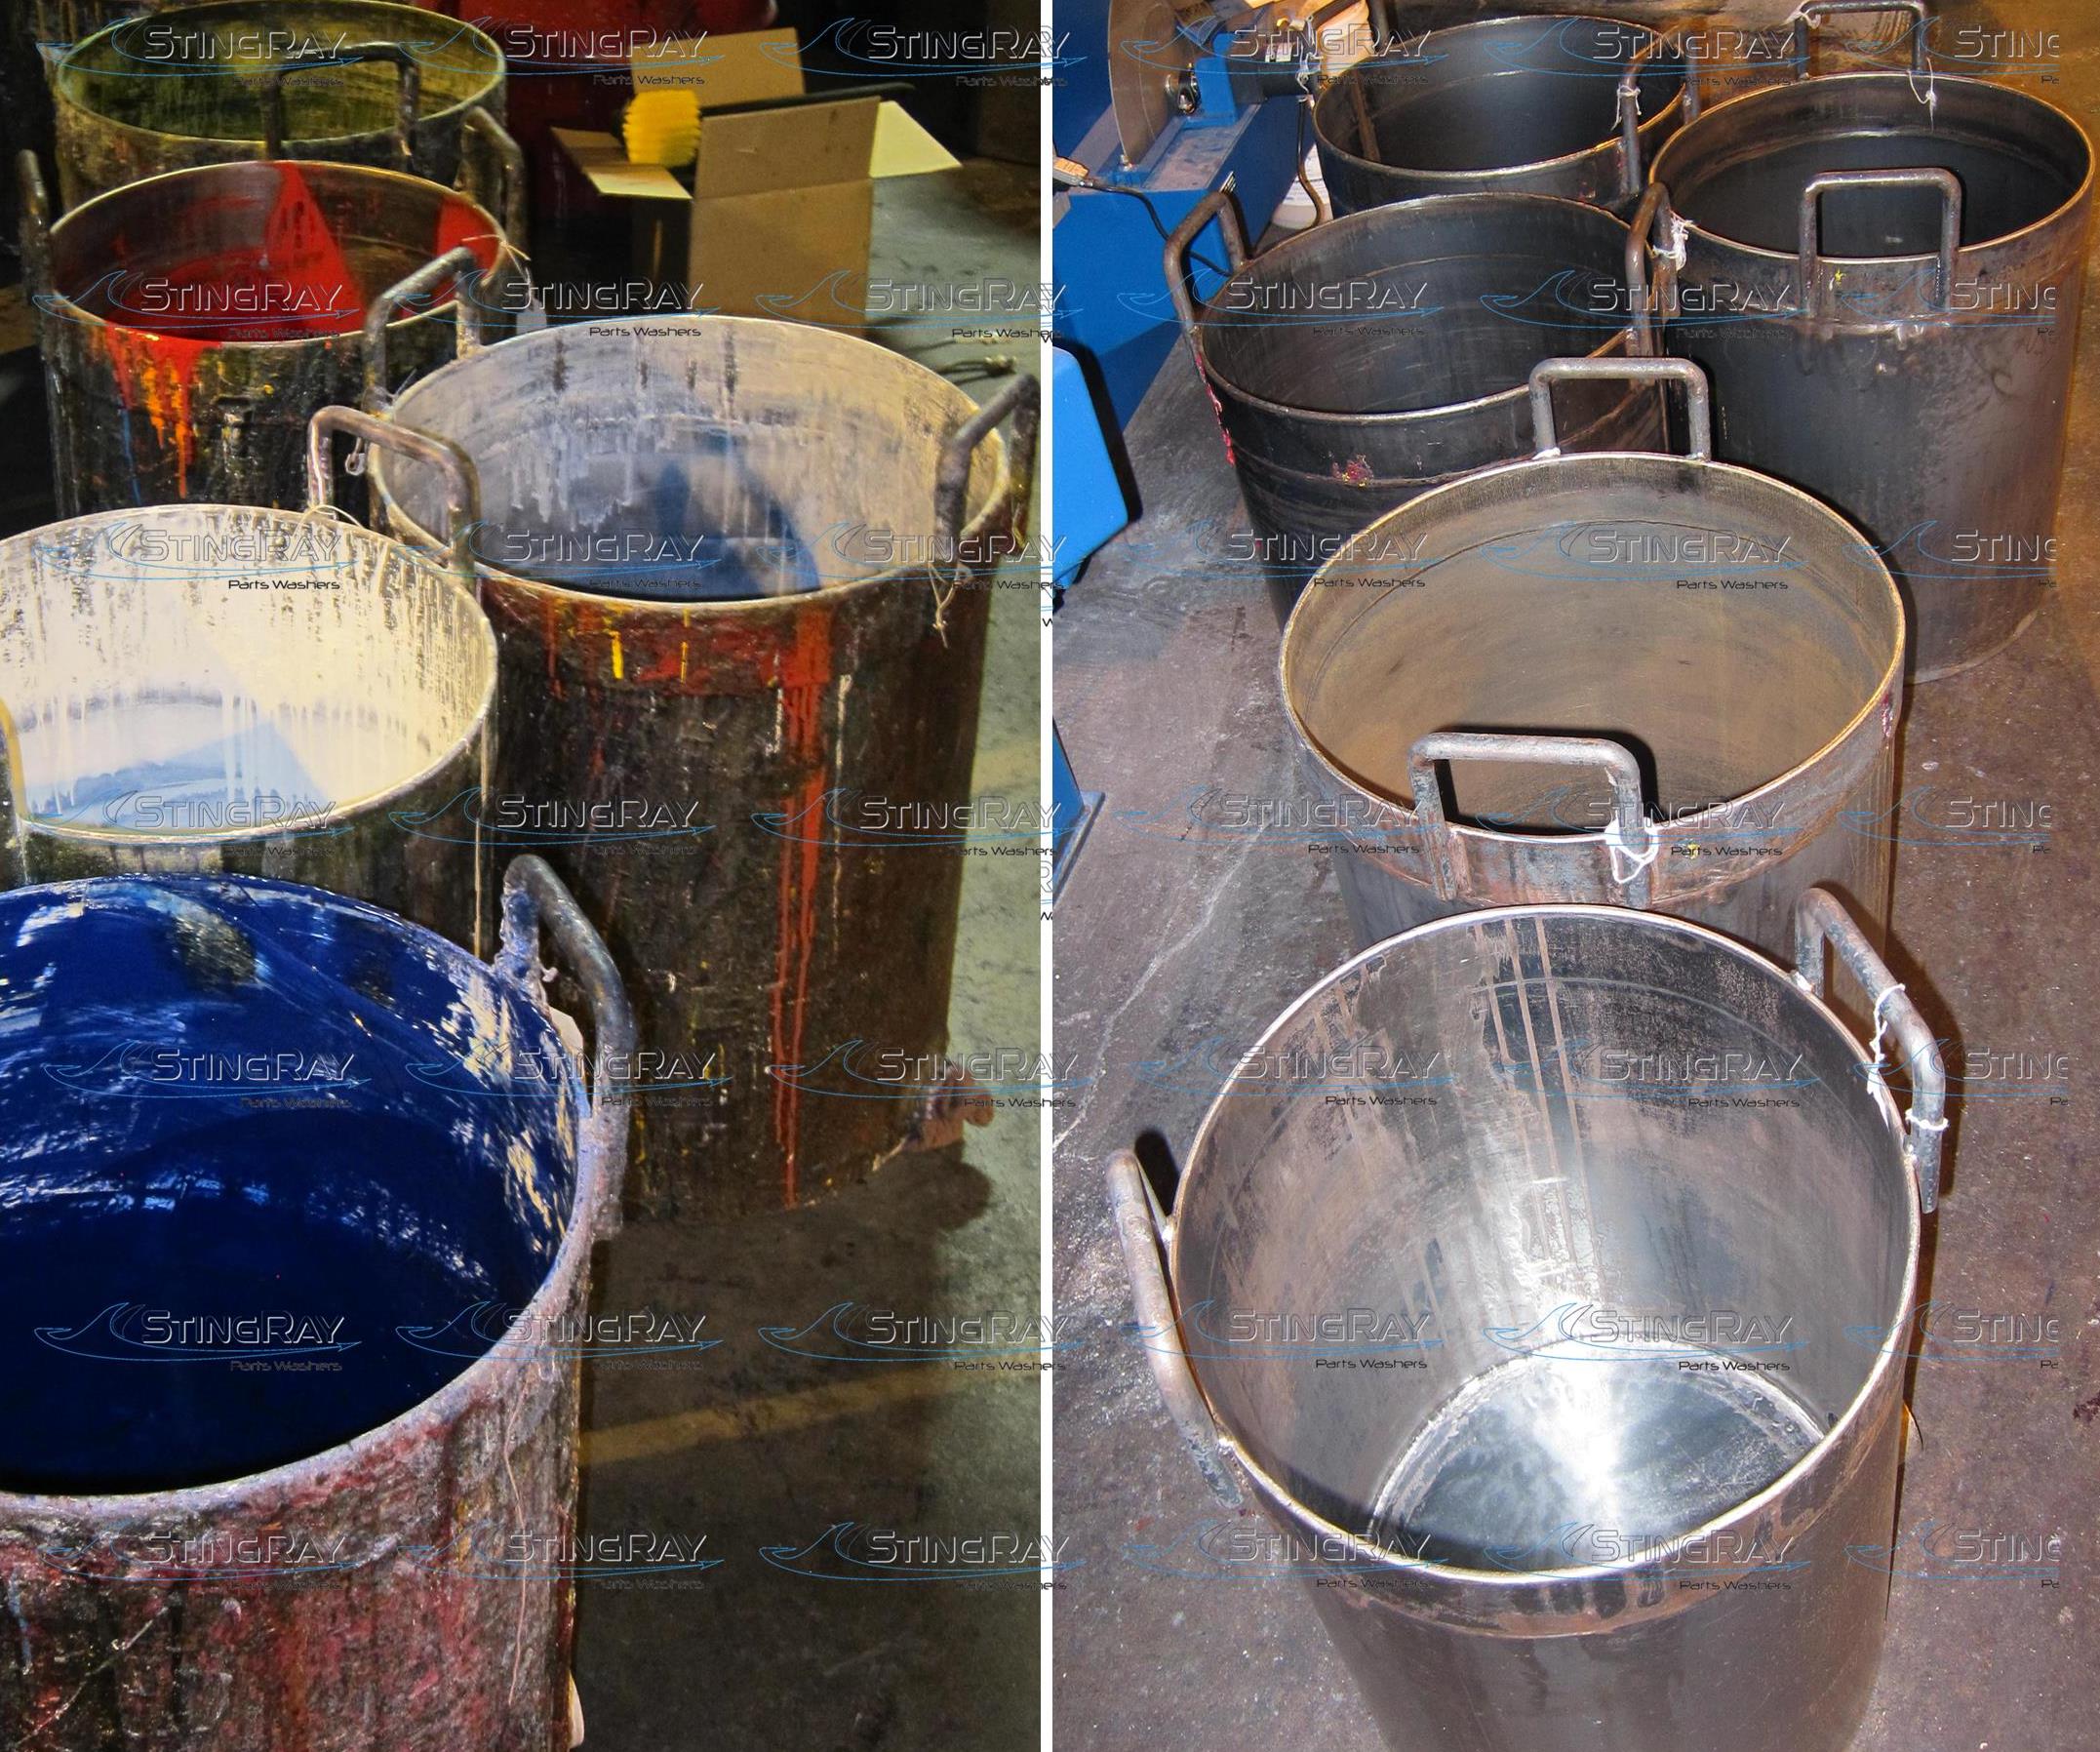 Before-and-After/Ink-Buckets-and-Pails/Ink-Buckets-in-a-StingRay-Cabinet-Spray-Washer